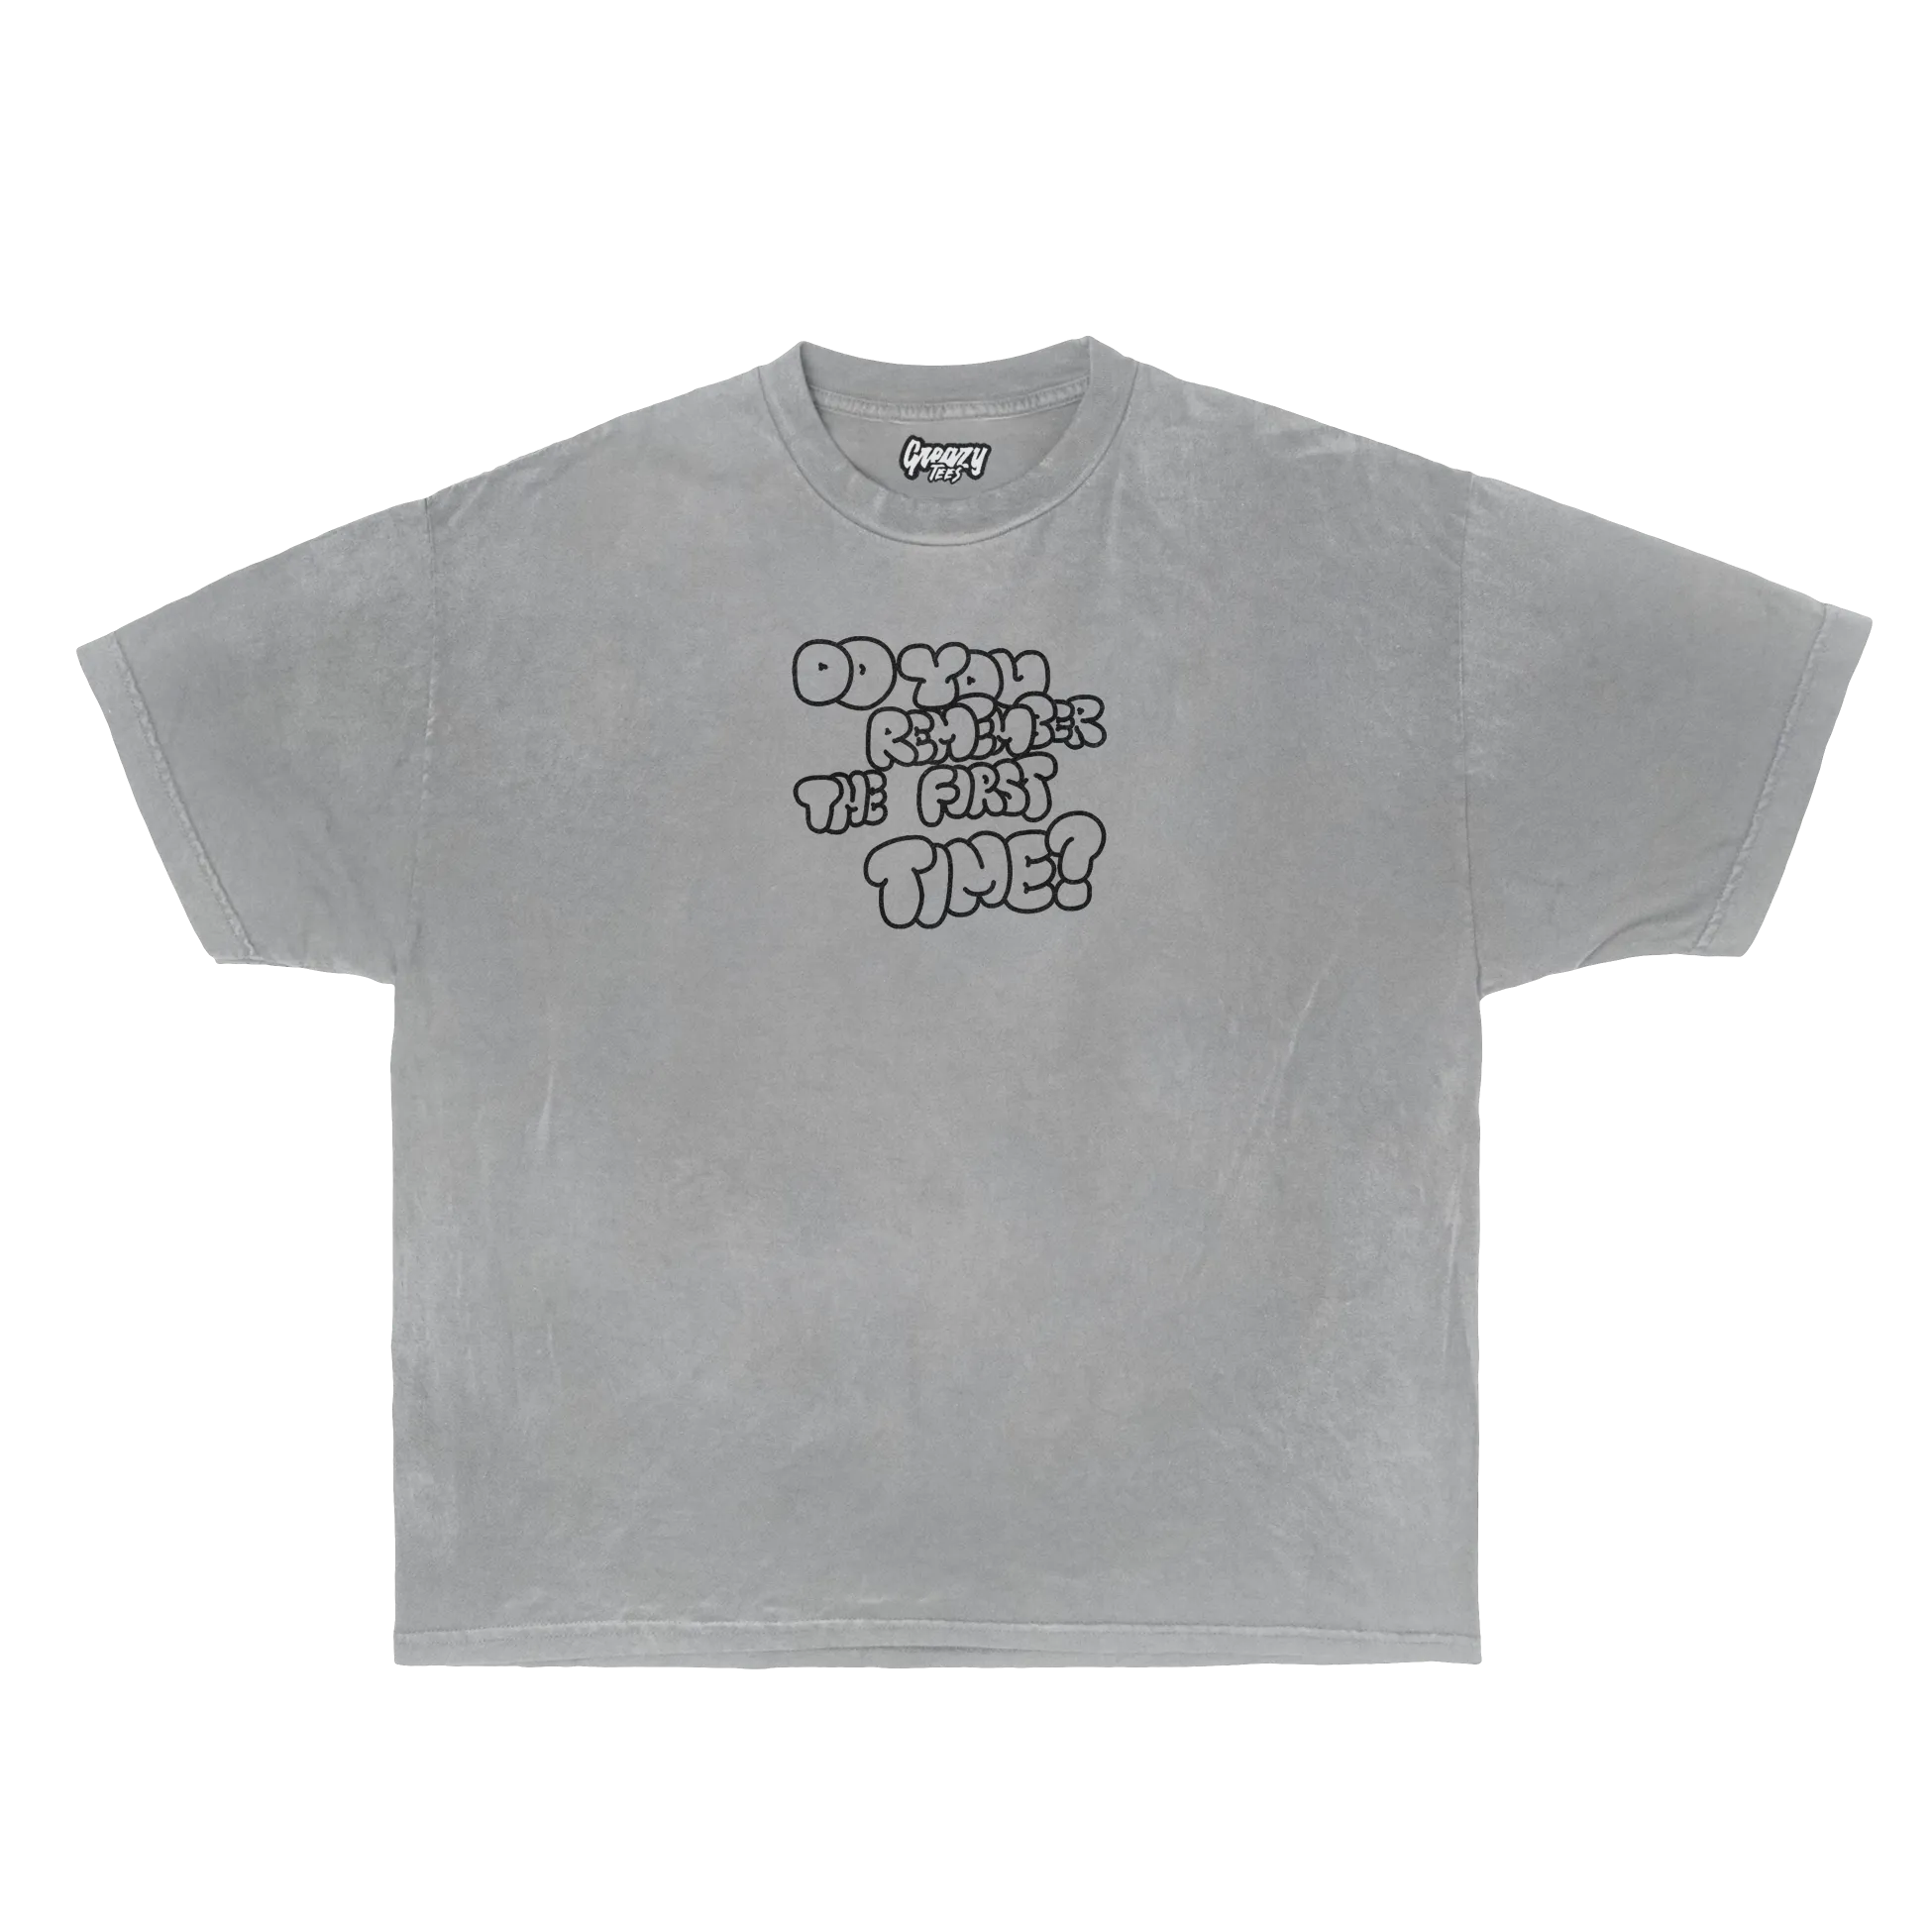 First Time Tee Tee Greazy Tees XS Heather Grey Oversized